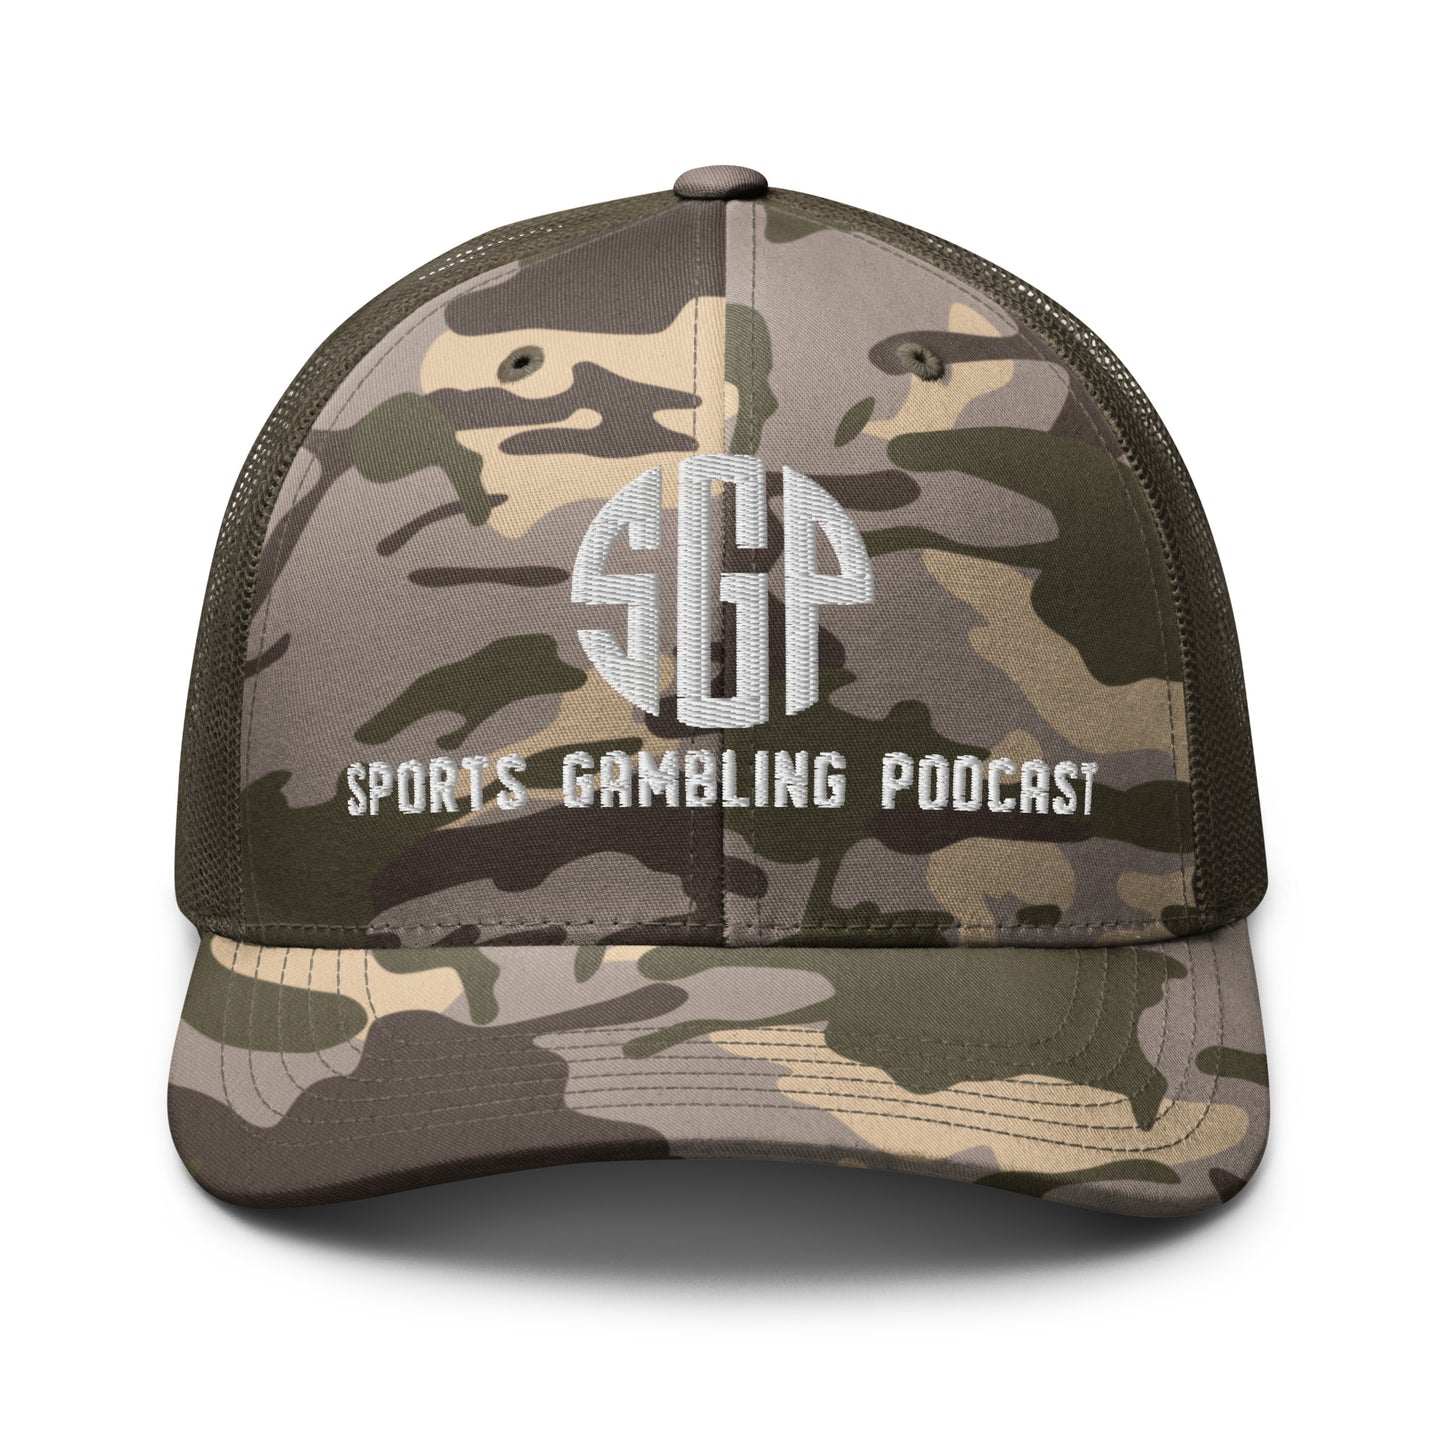 SGP (Sports Gambling Podcast) - Camouflage trucker hat